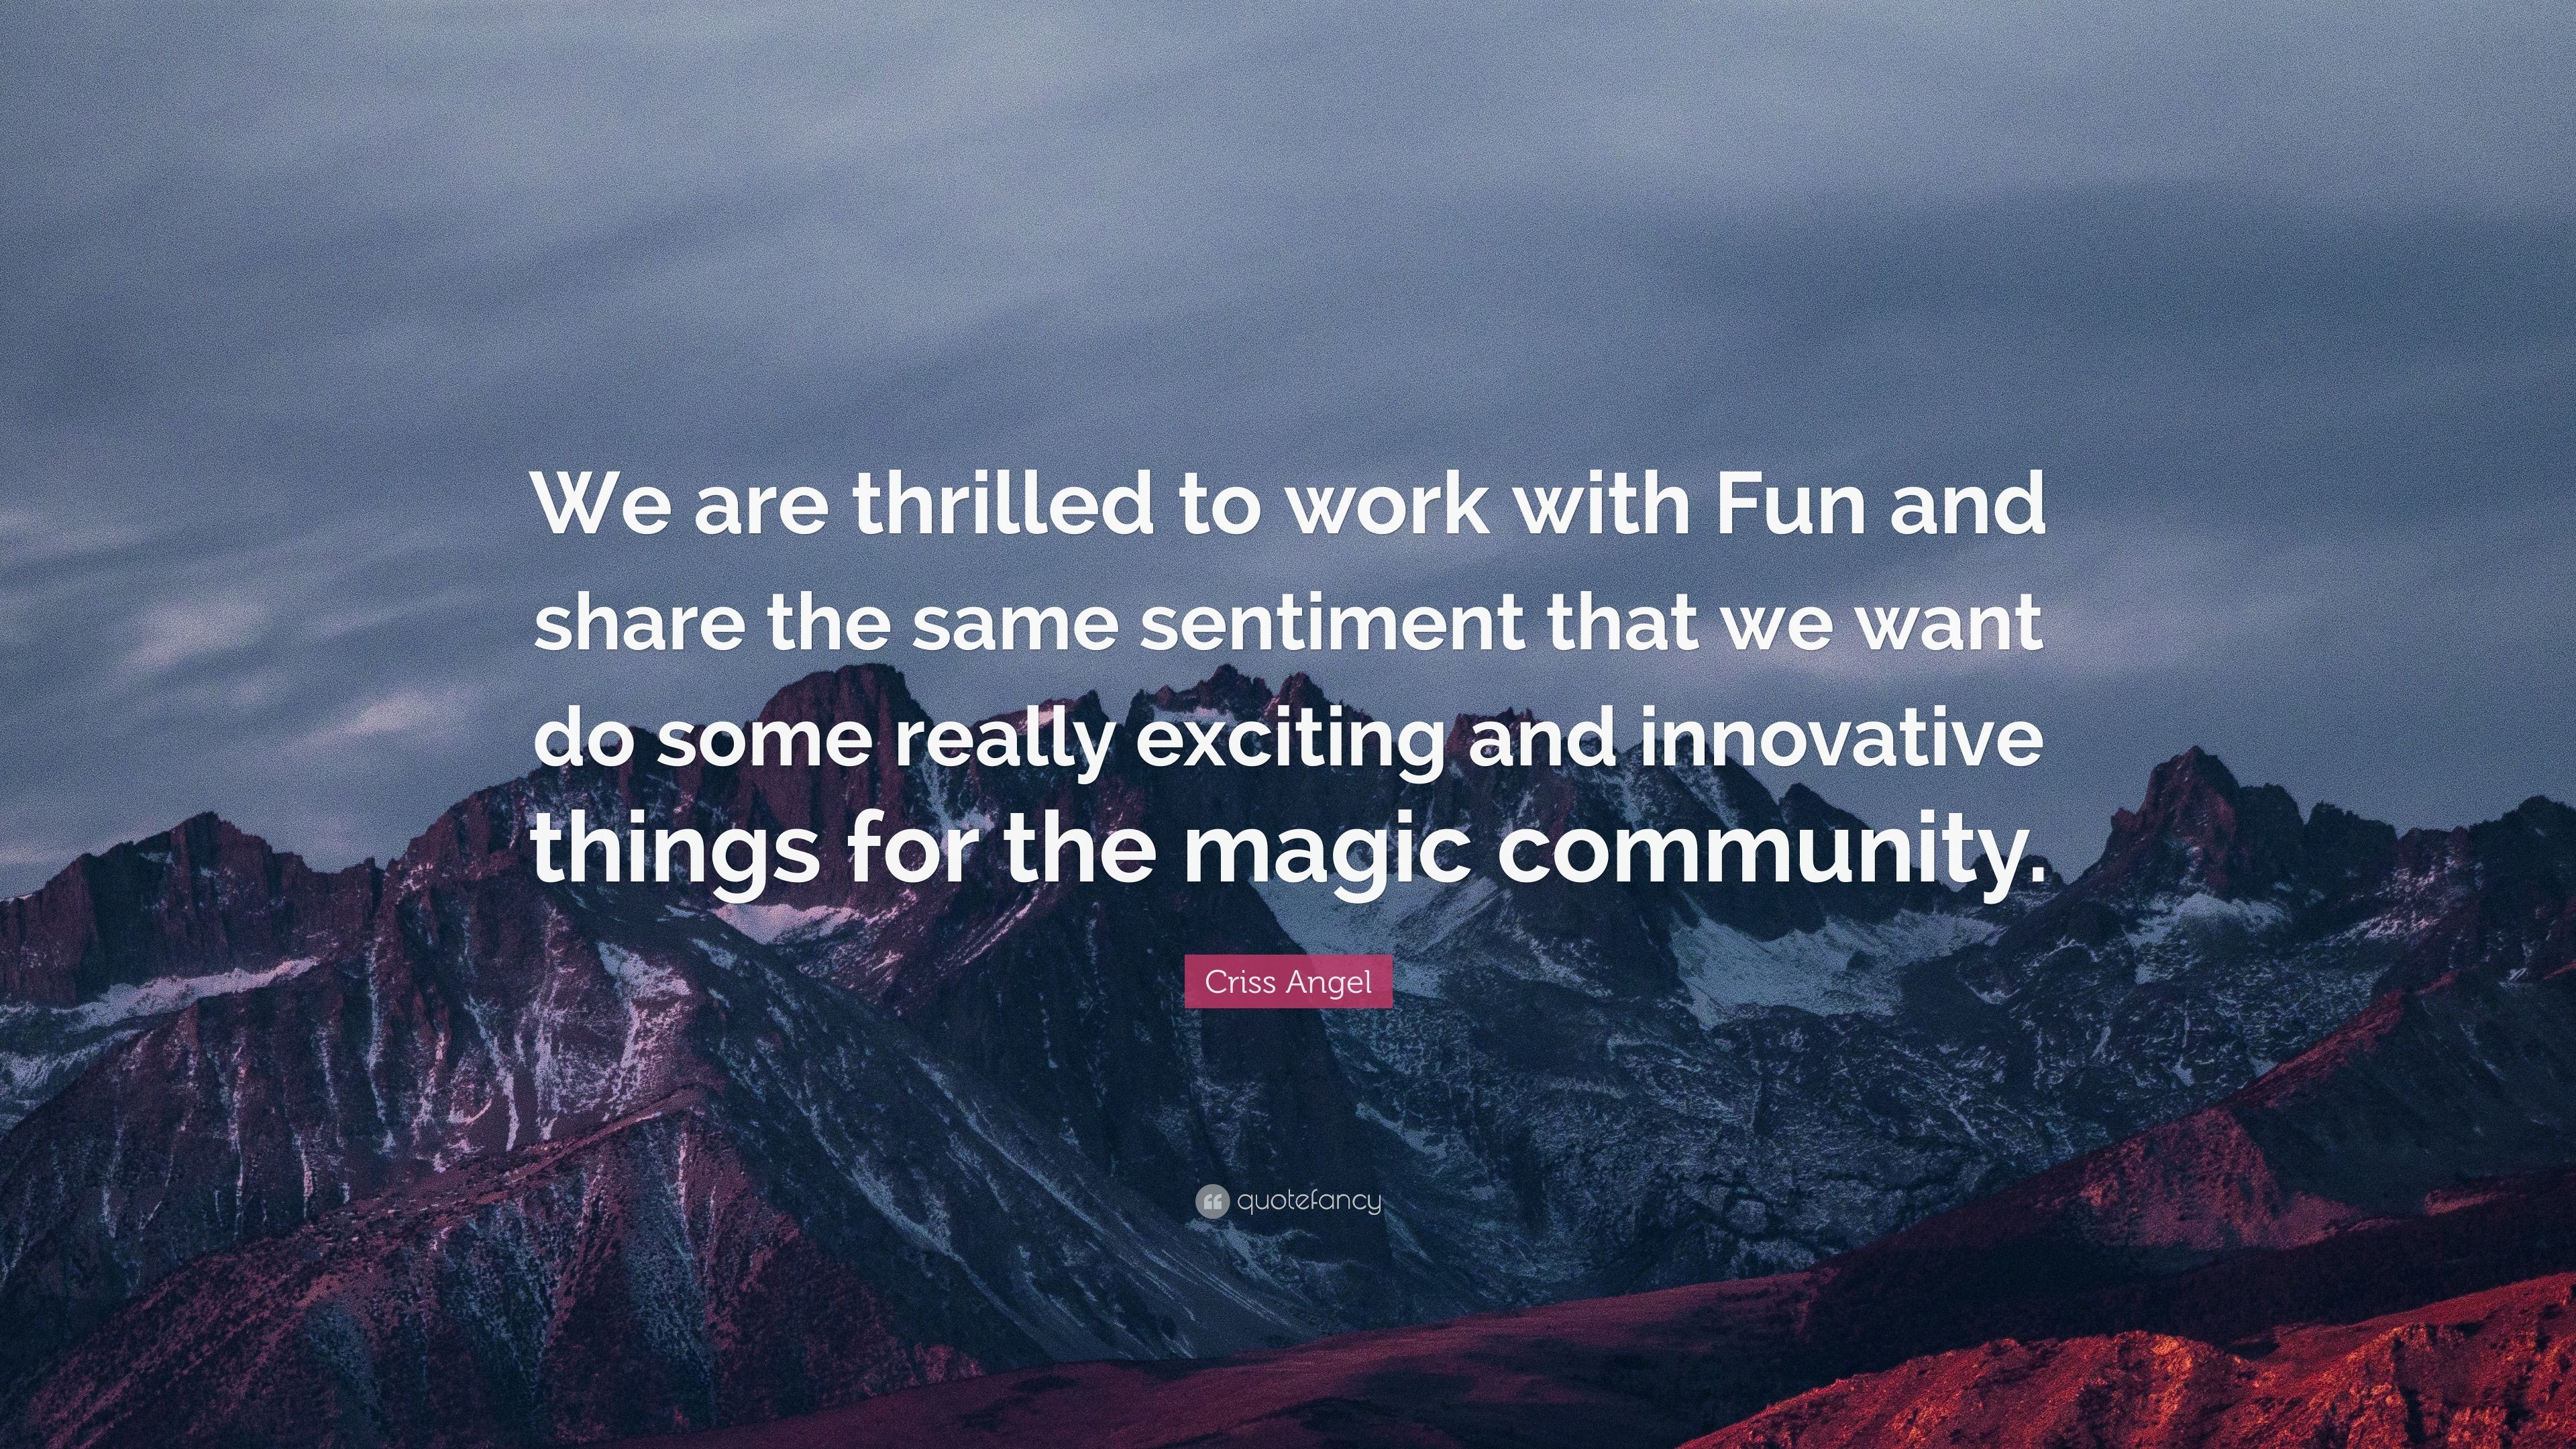 3840x2160 Criss Angel Quote: “We are thrilled to work with Fun and share the same